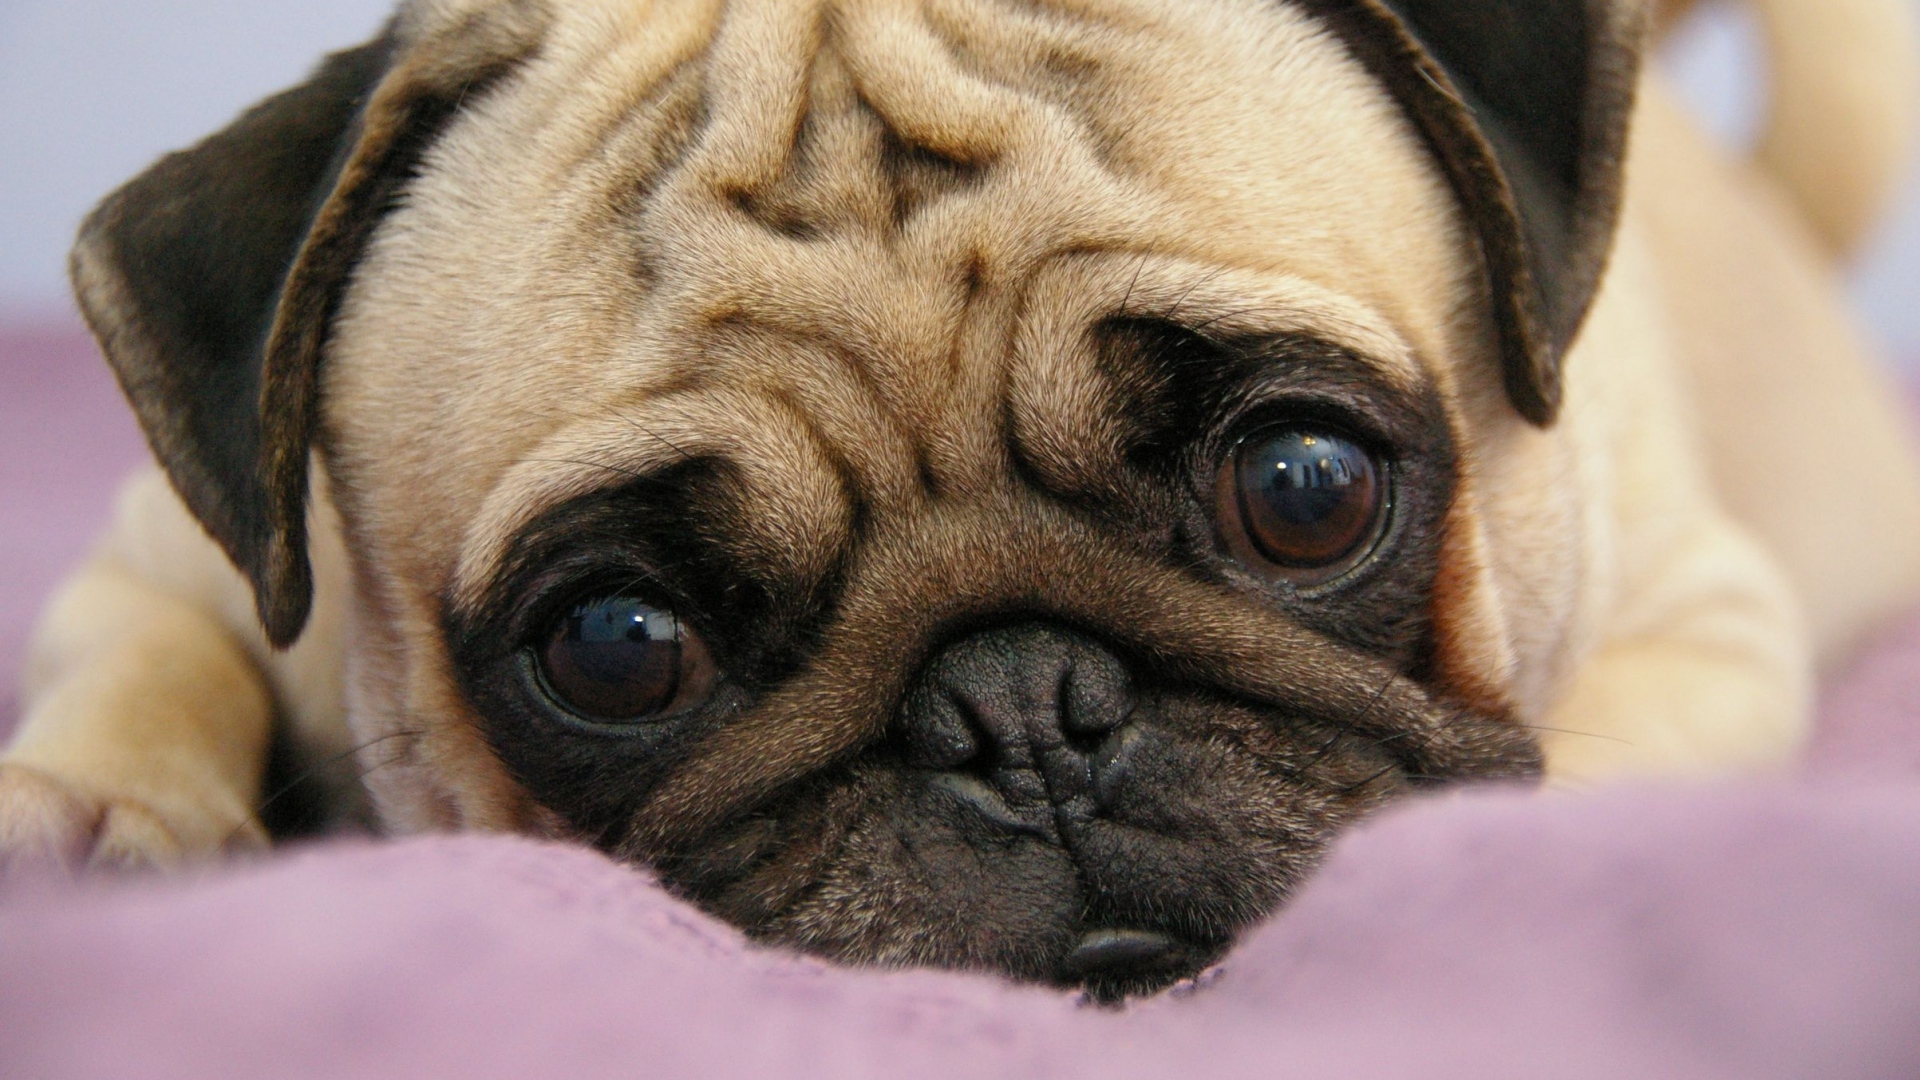 Free download Download Wallpaper 1920x1080 pug puppy snout eyes lie Full HD [1920x1080] for your